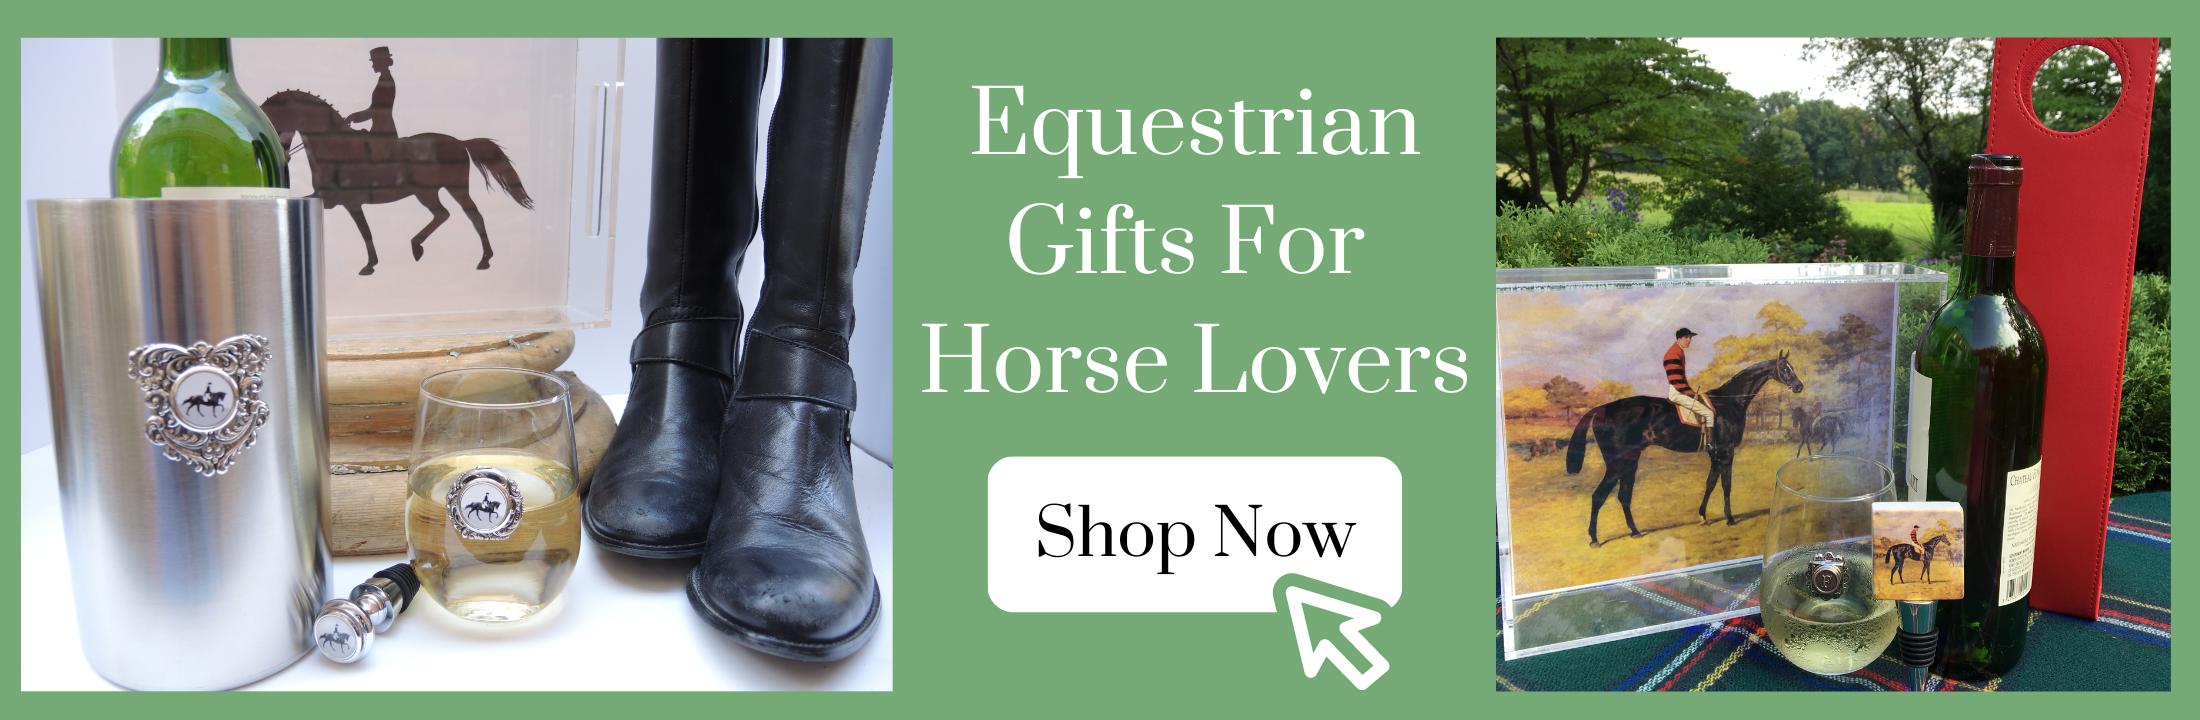 Equestrian Gifts for Horse Lovers